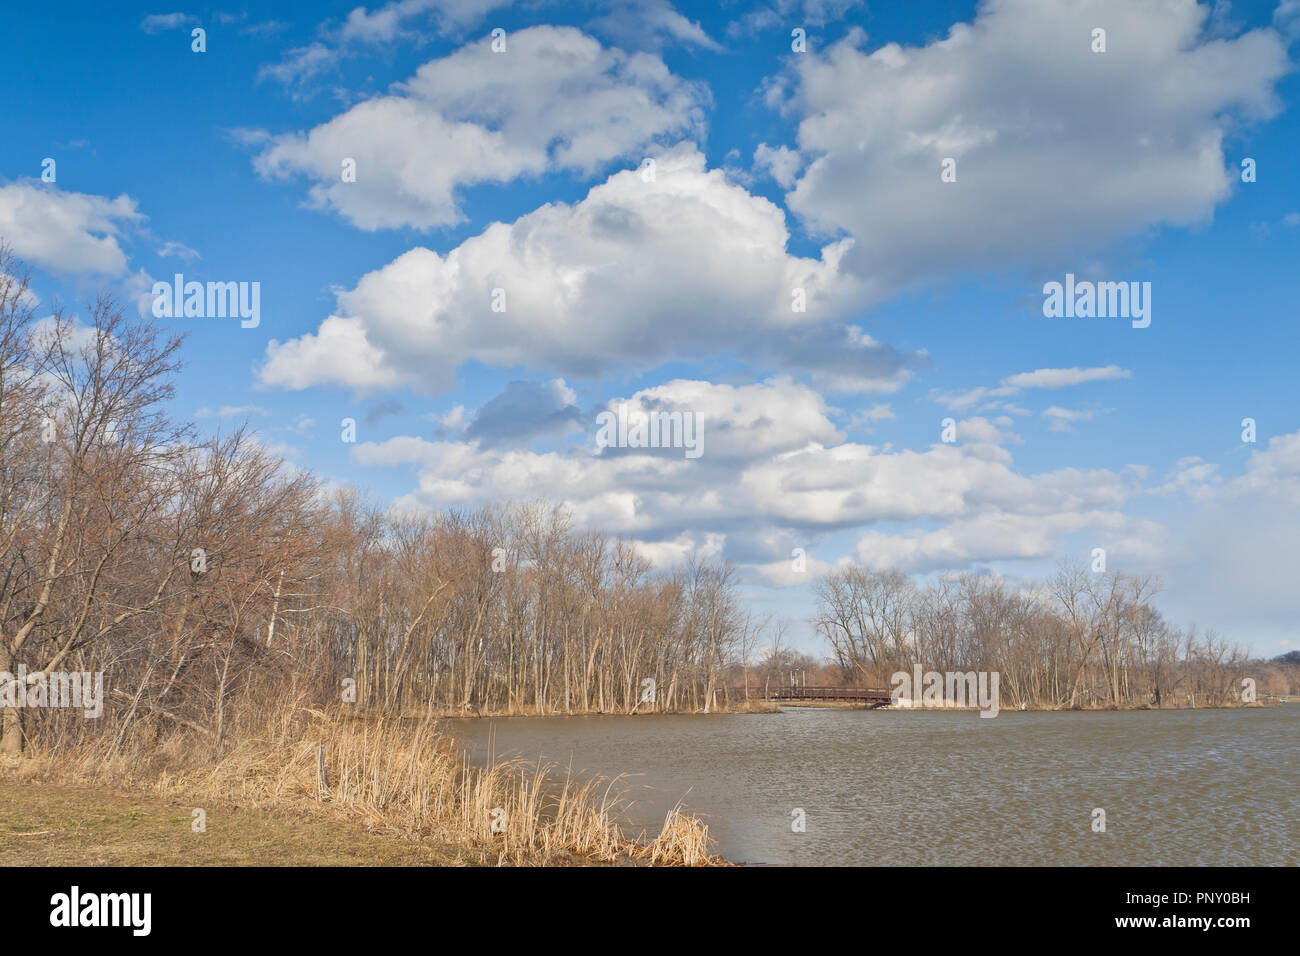 Puffy white clouds stand out against a blue sky above a bridge over a portion of Creve Coeur Lake on a blustery evening in early spring. Stock Photo